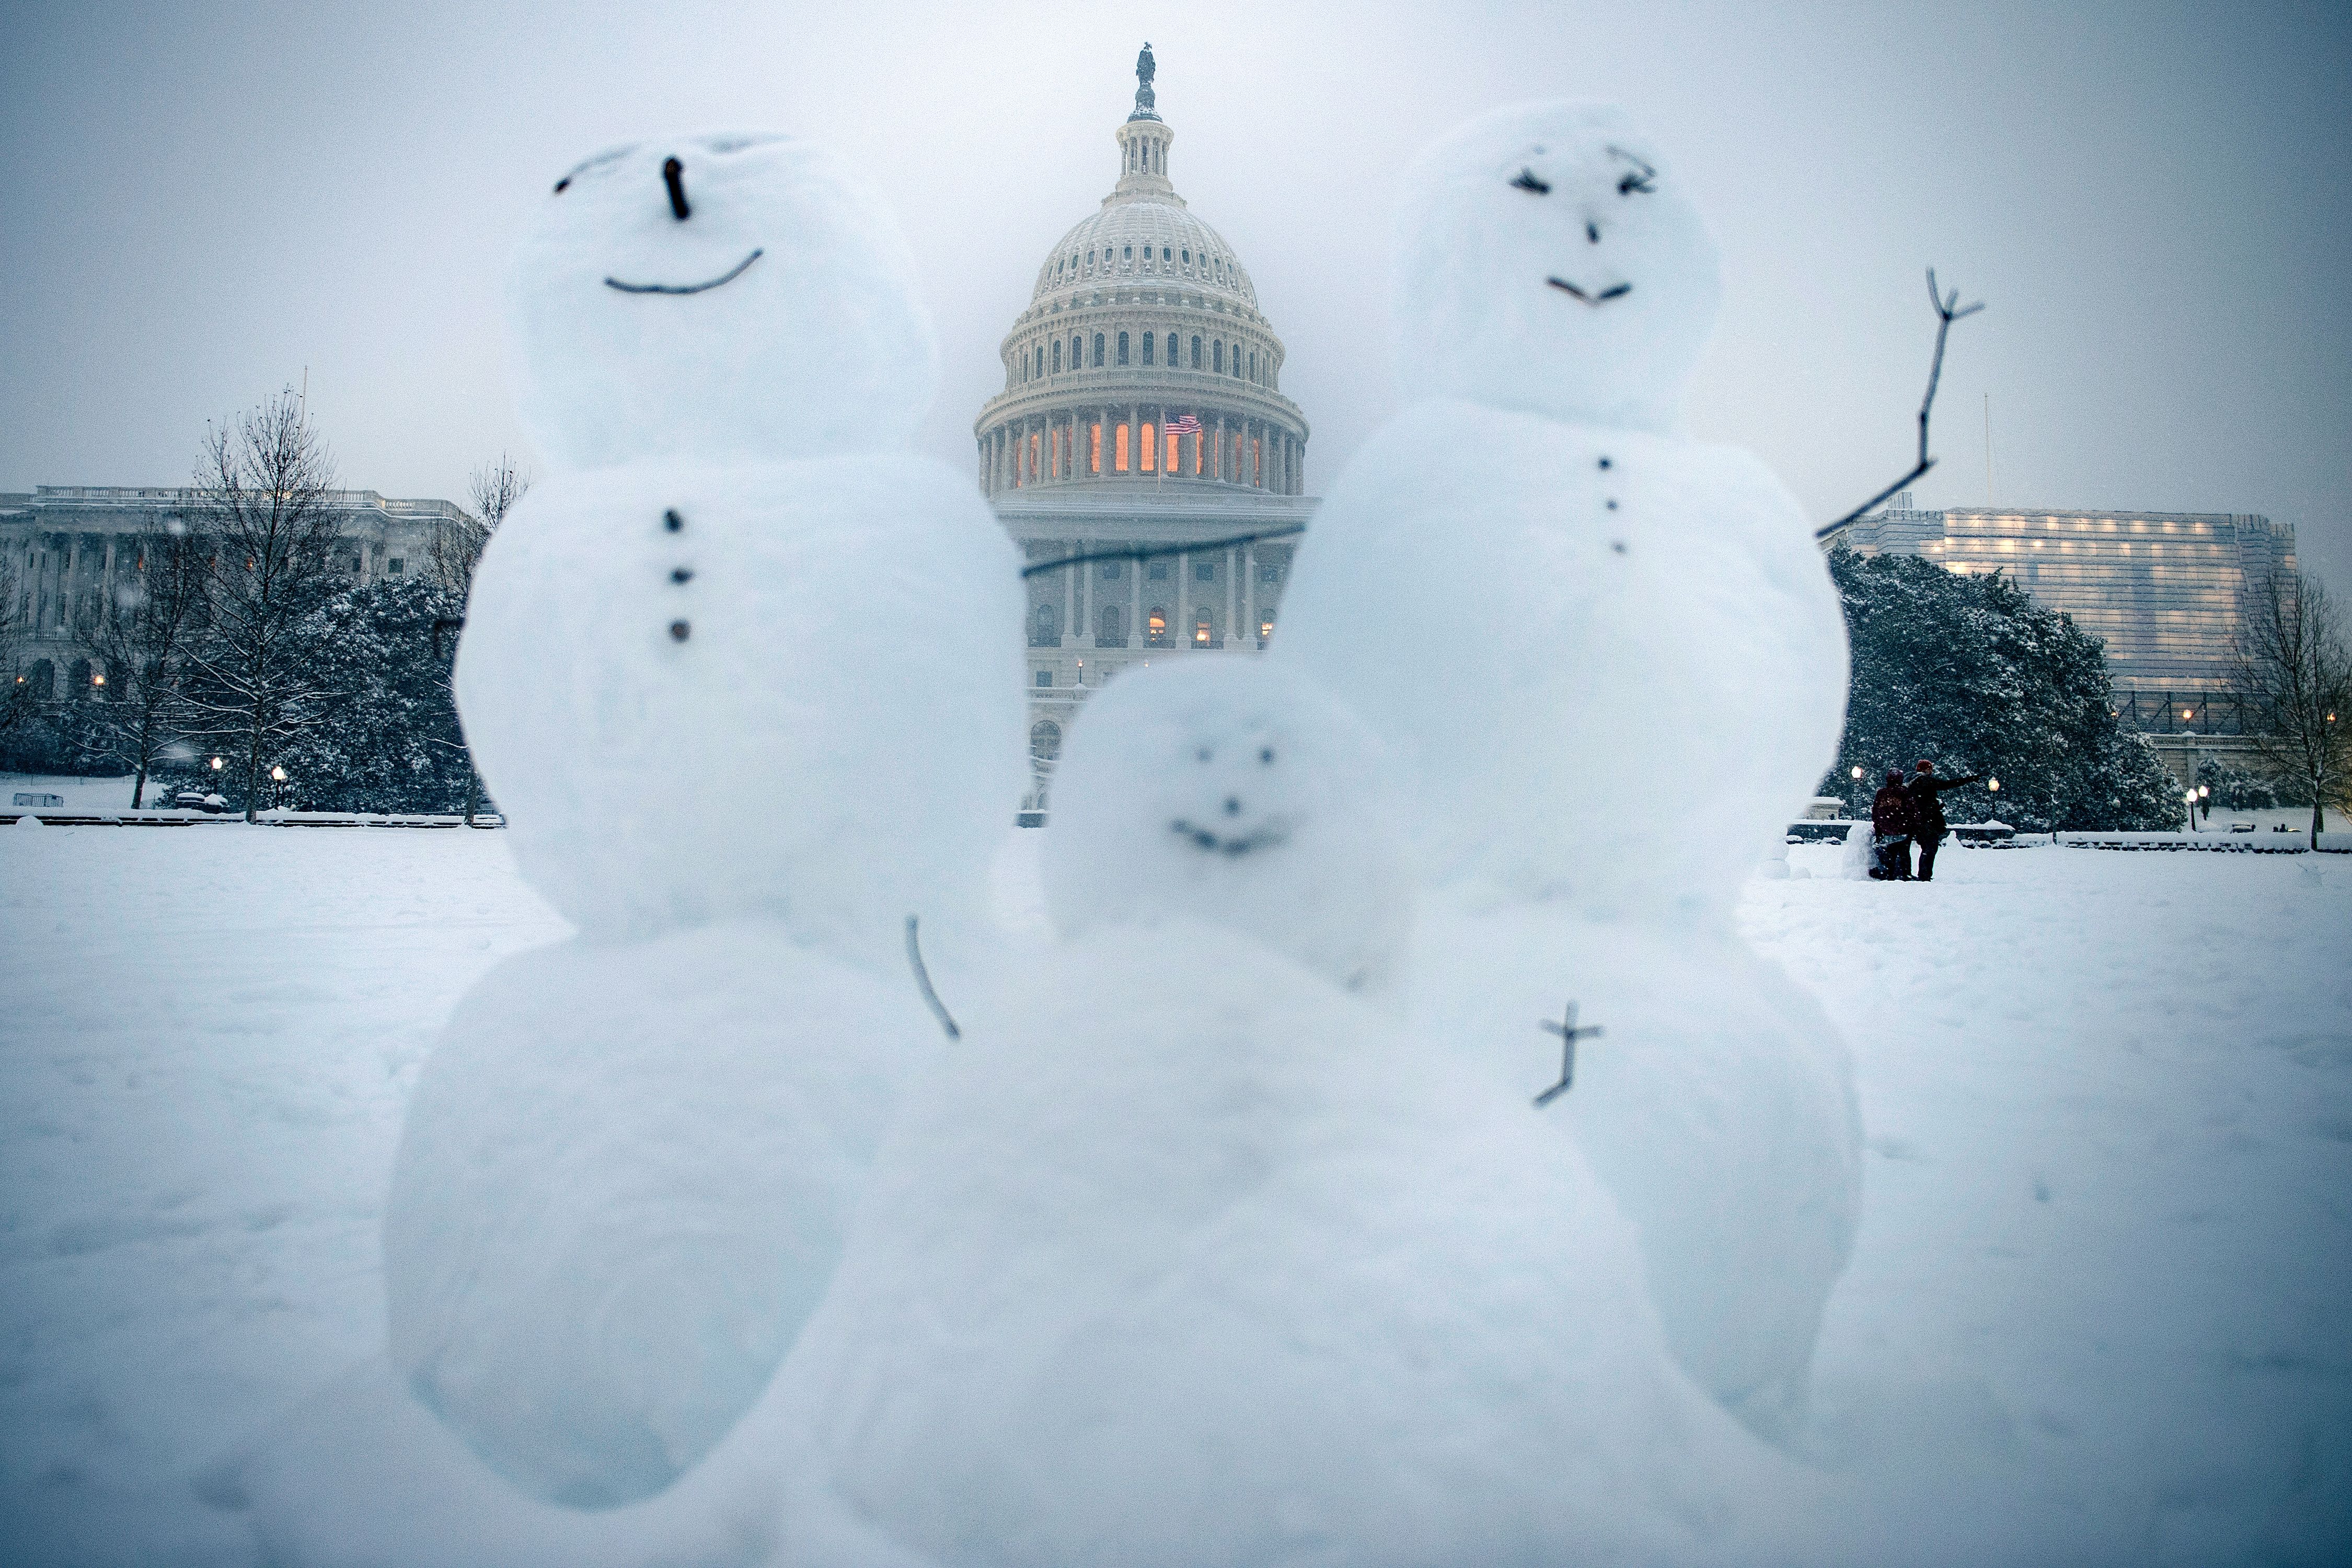 Snowmen are seen on Capitol Hill during a winter storm Sunday in Washington, DC.